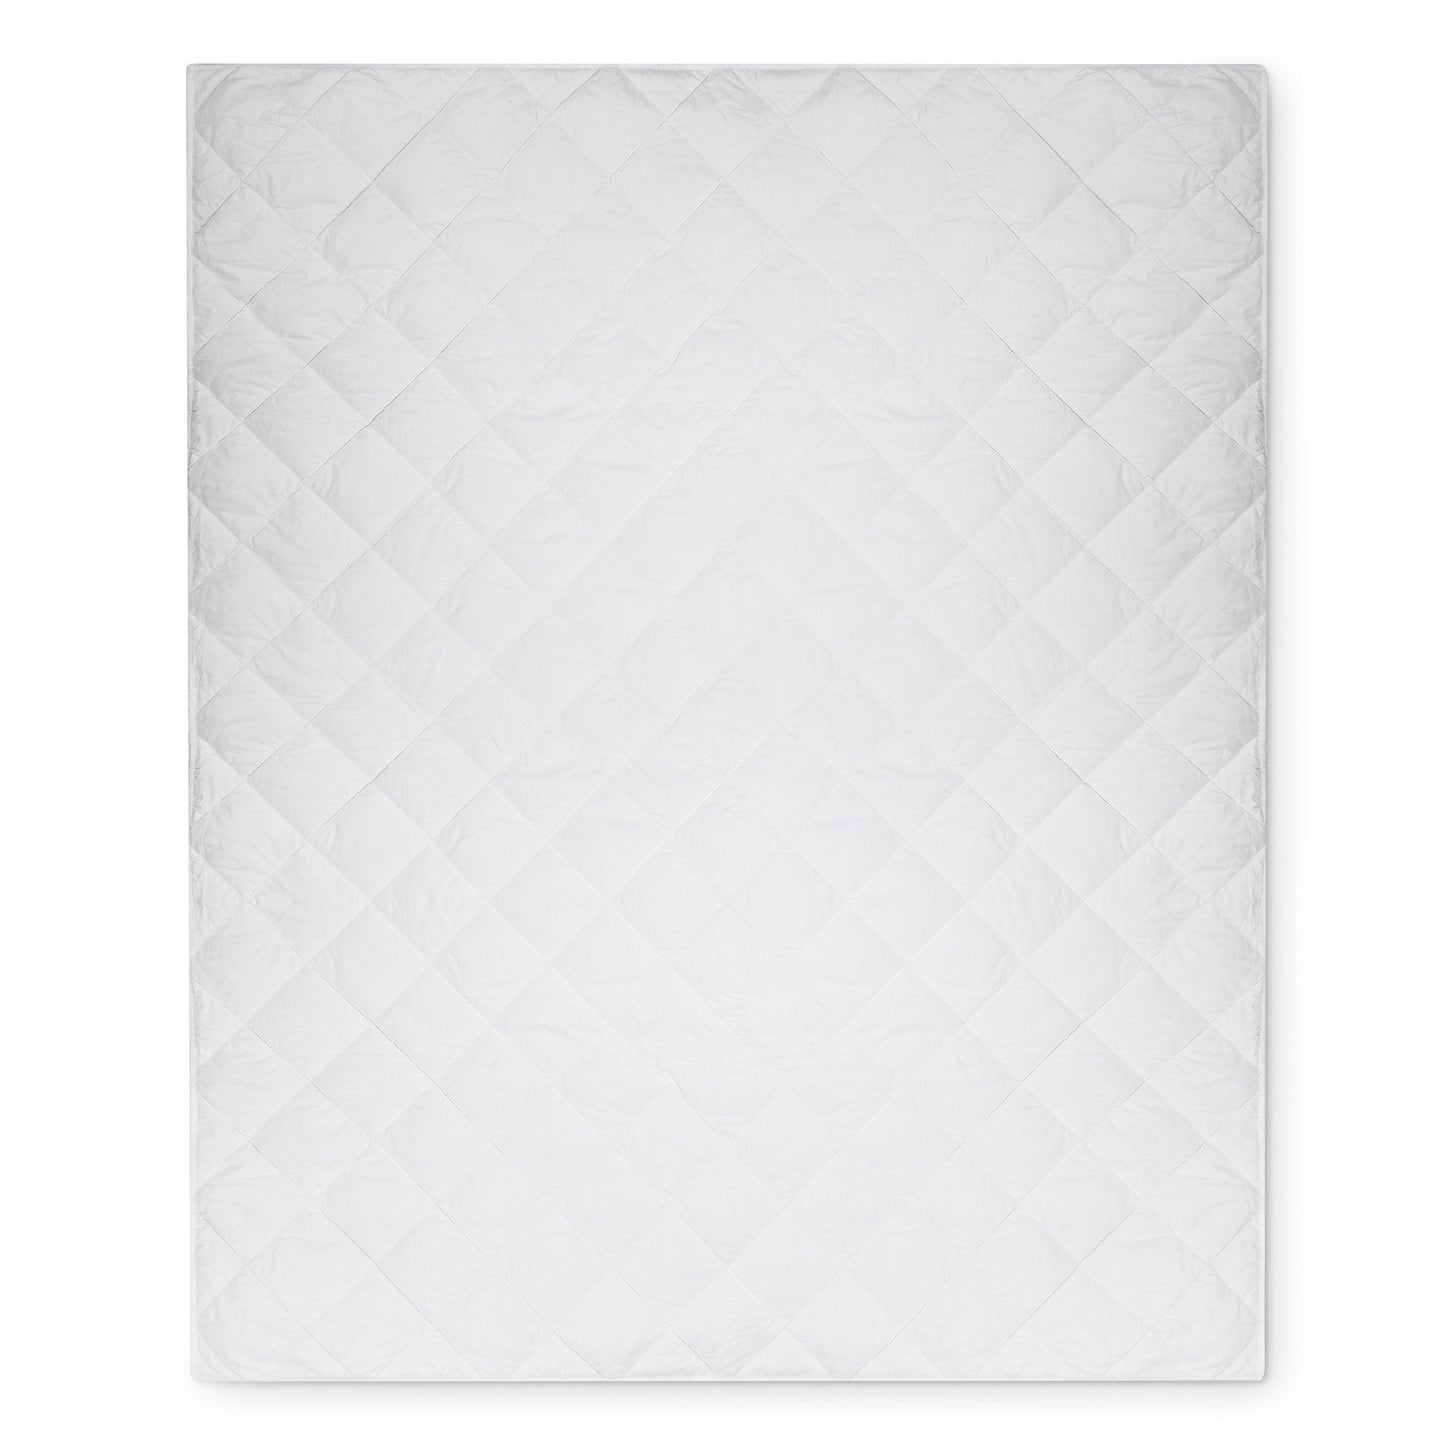 A weighted blanket fully laid out with a diamond pattern